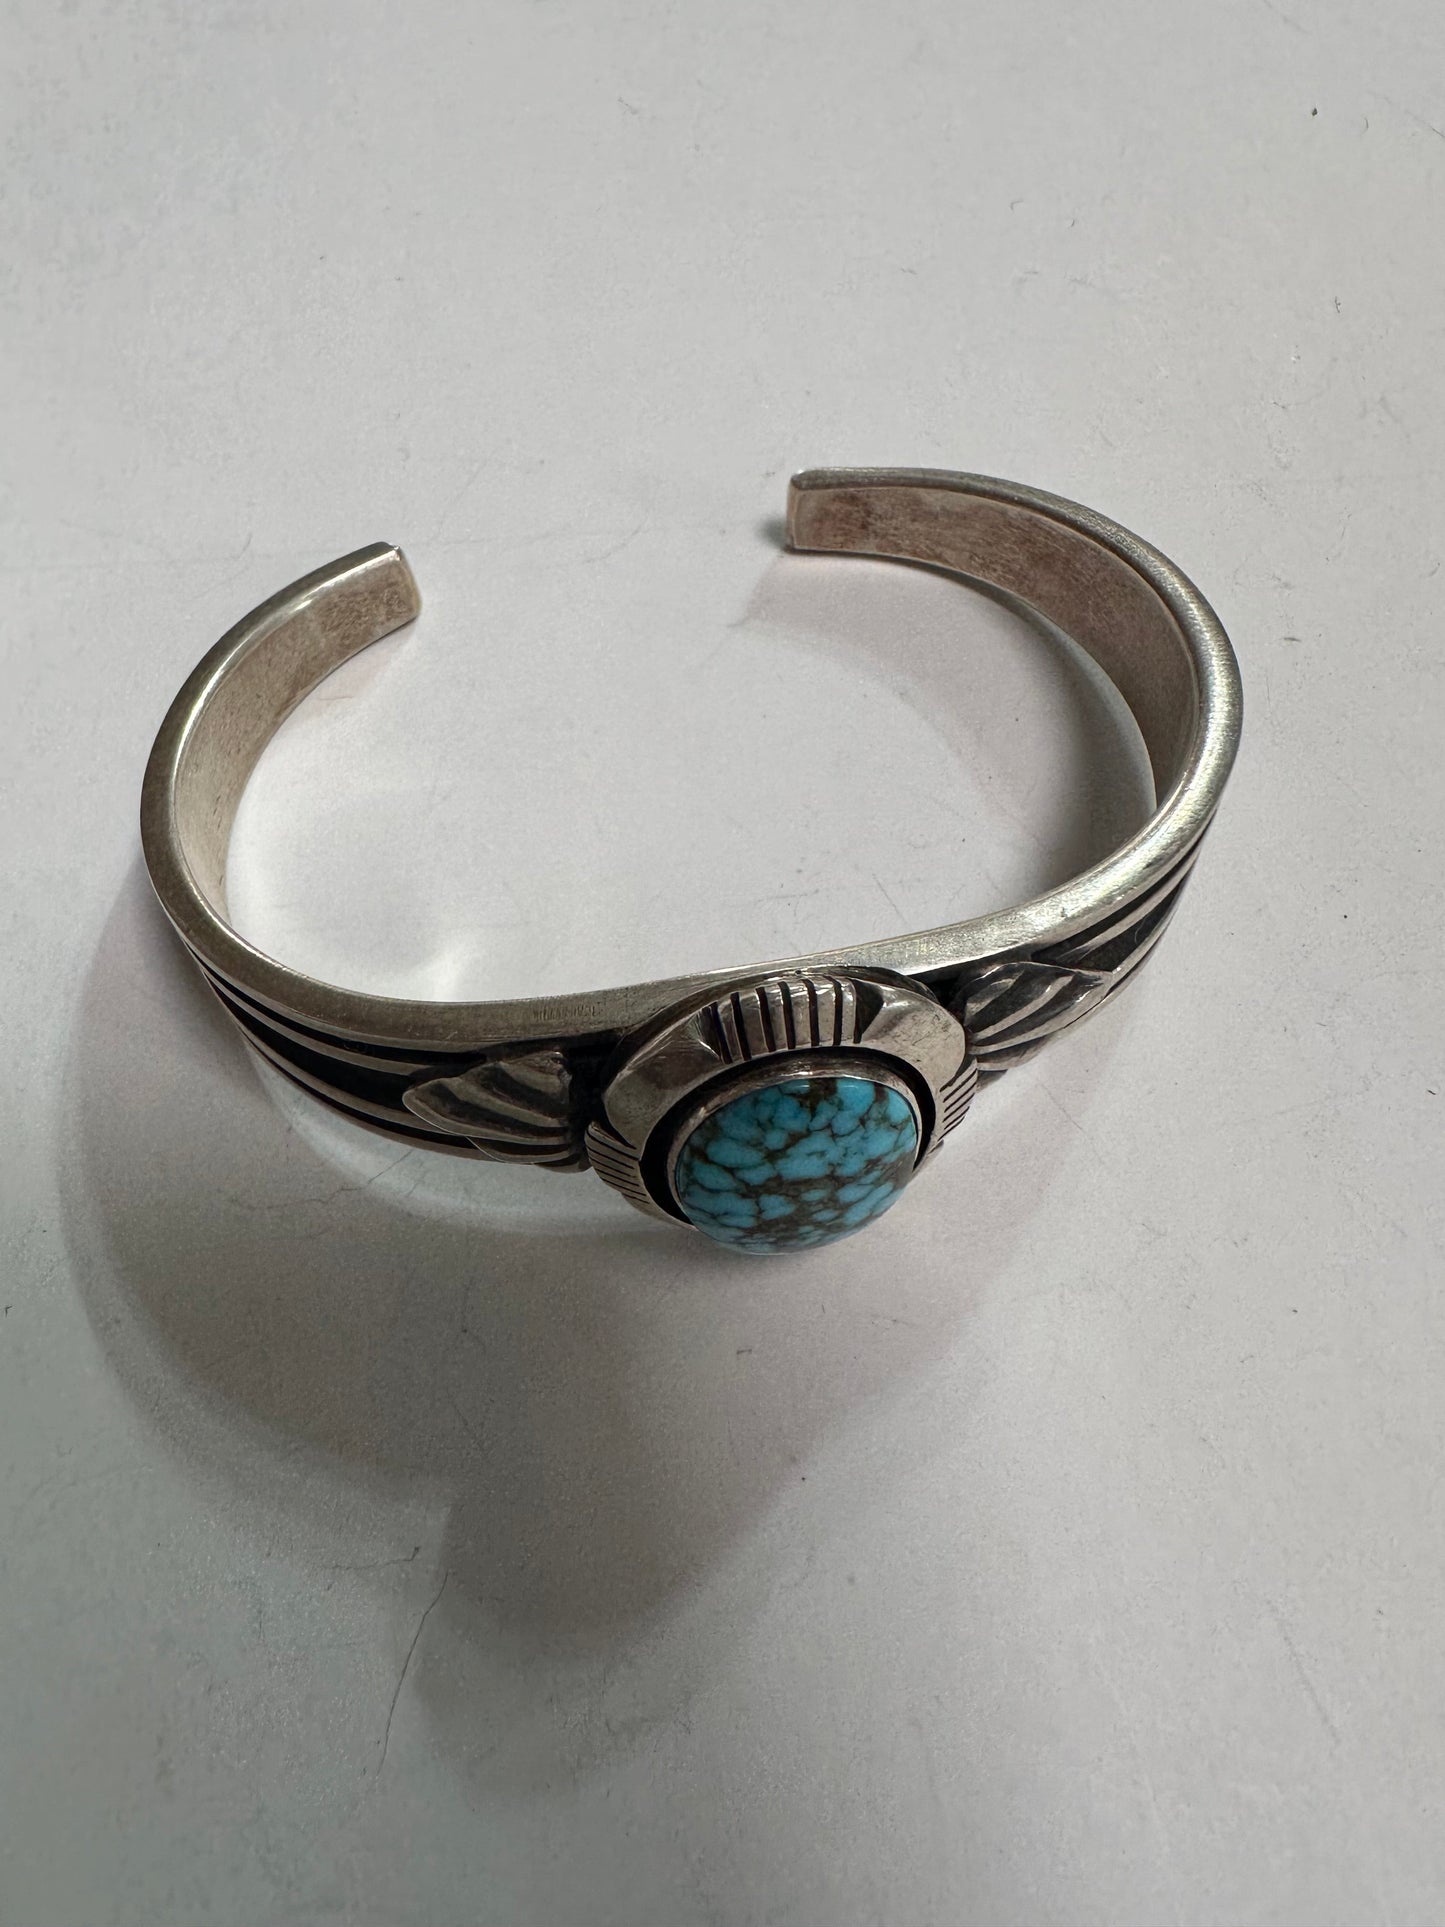 Beautiful Navajo Sterling Turquoise Bracelet Cuff Signed